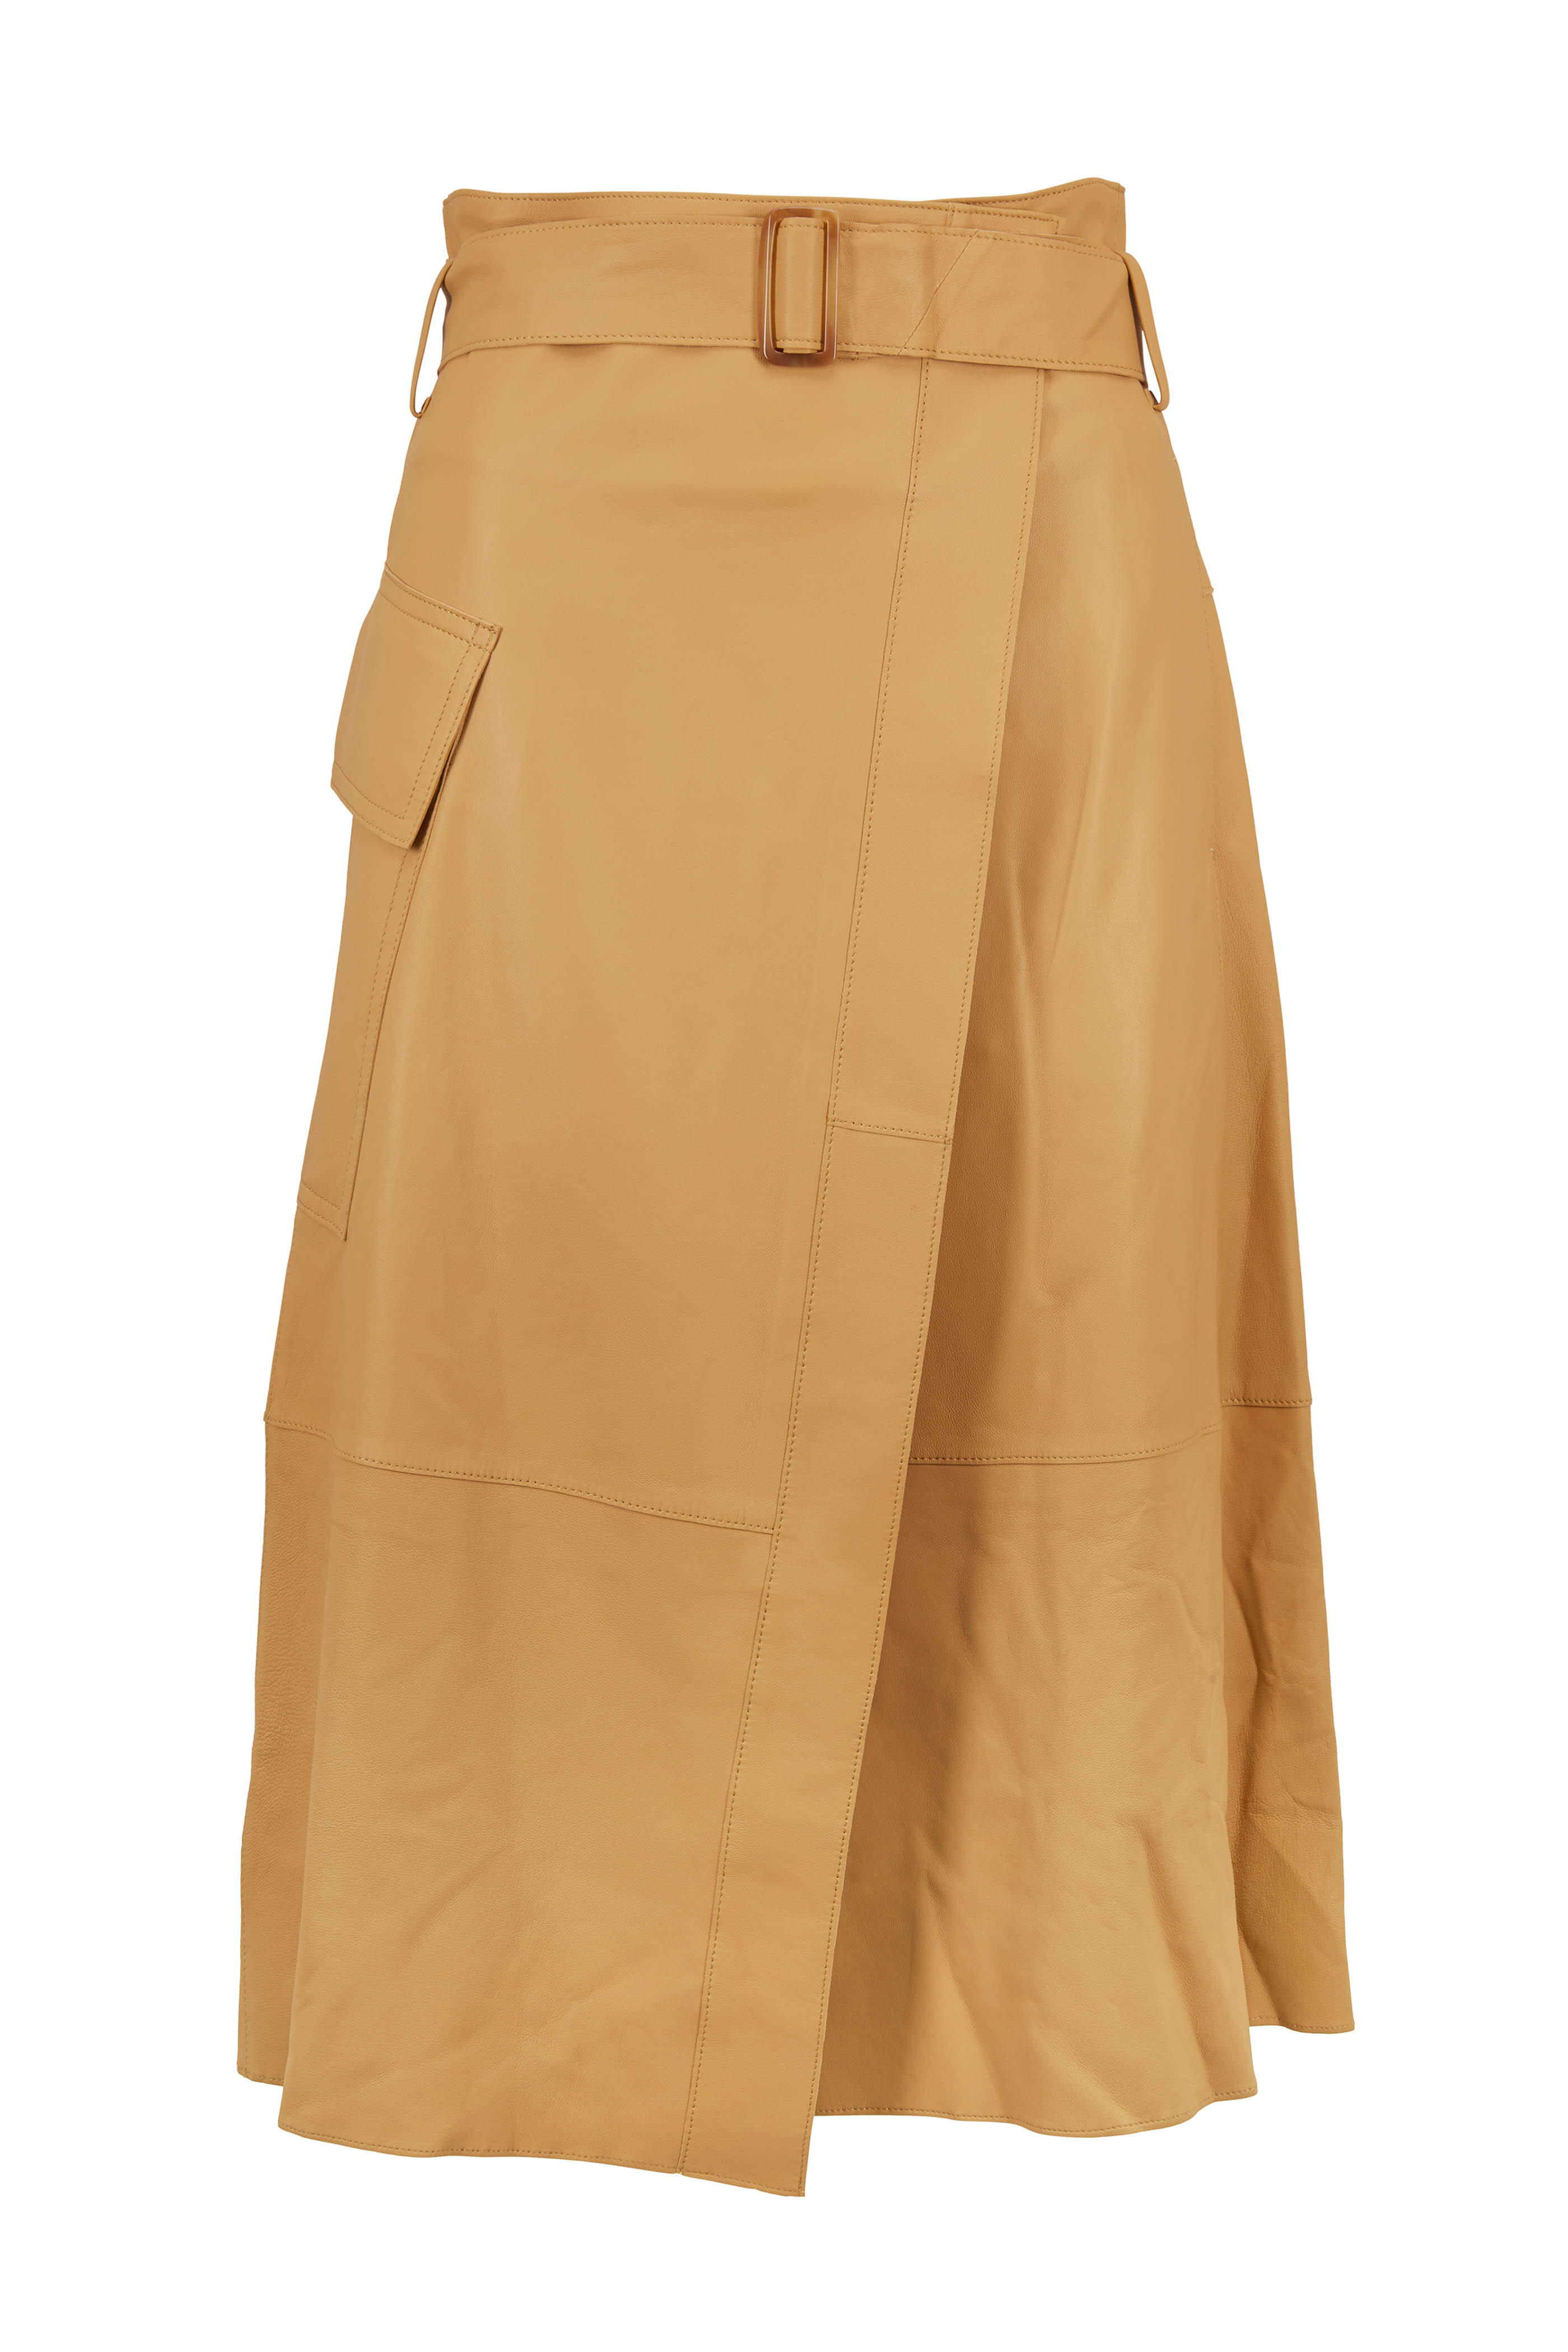 Vince - Straw Leather Belted Wrap Skirt